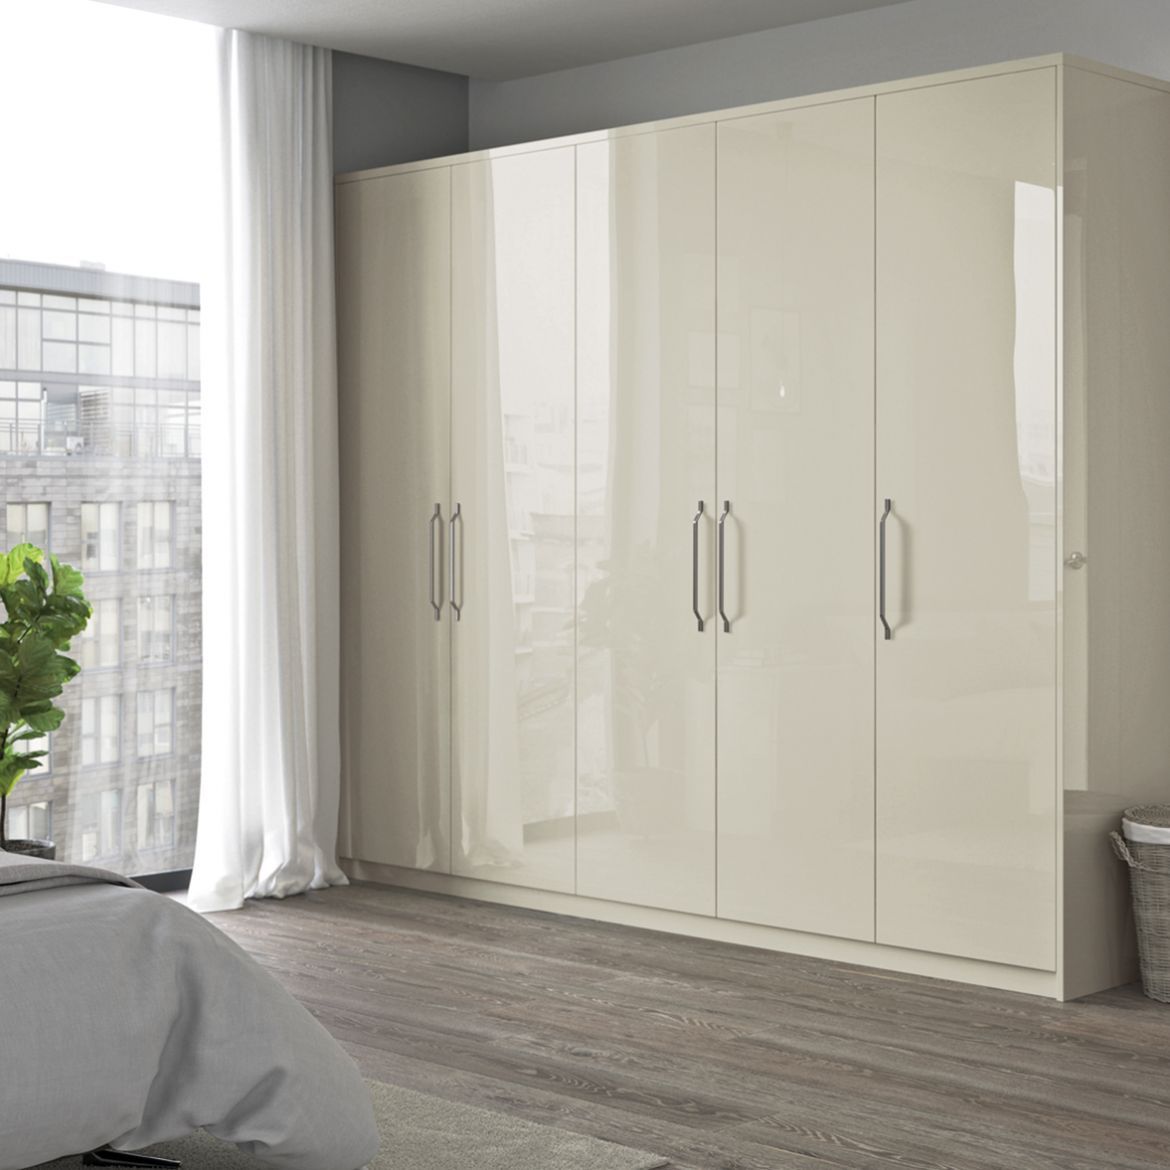 Reflections Wardrobe | Cash & Carry Kitchens In Gloss Wardrobes (View 14 of 15)